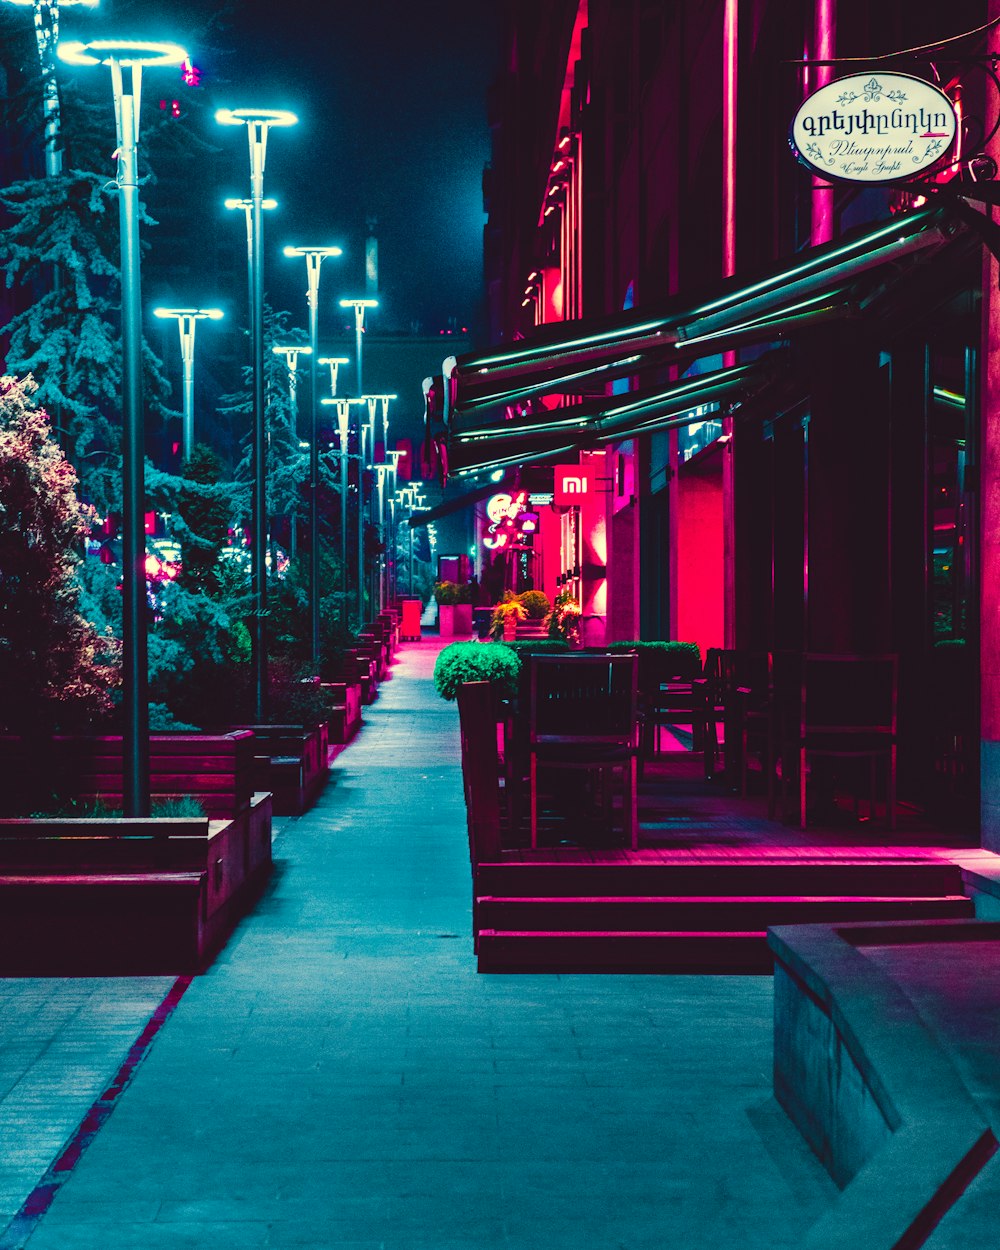 shops and lampposts during night